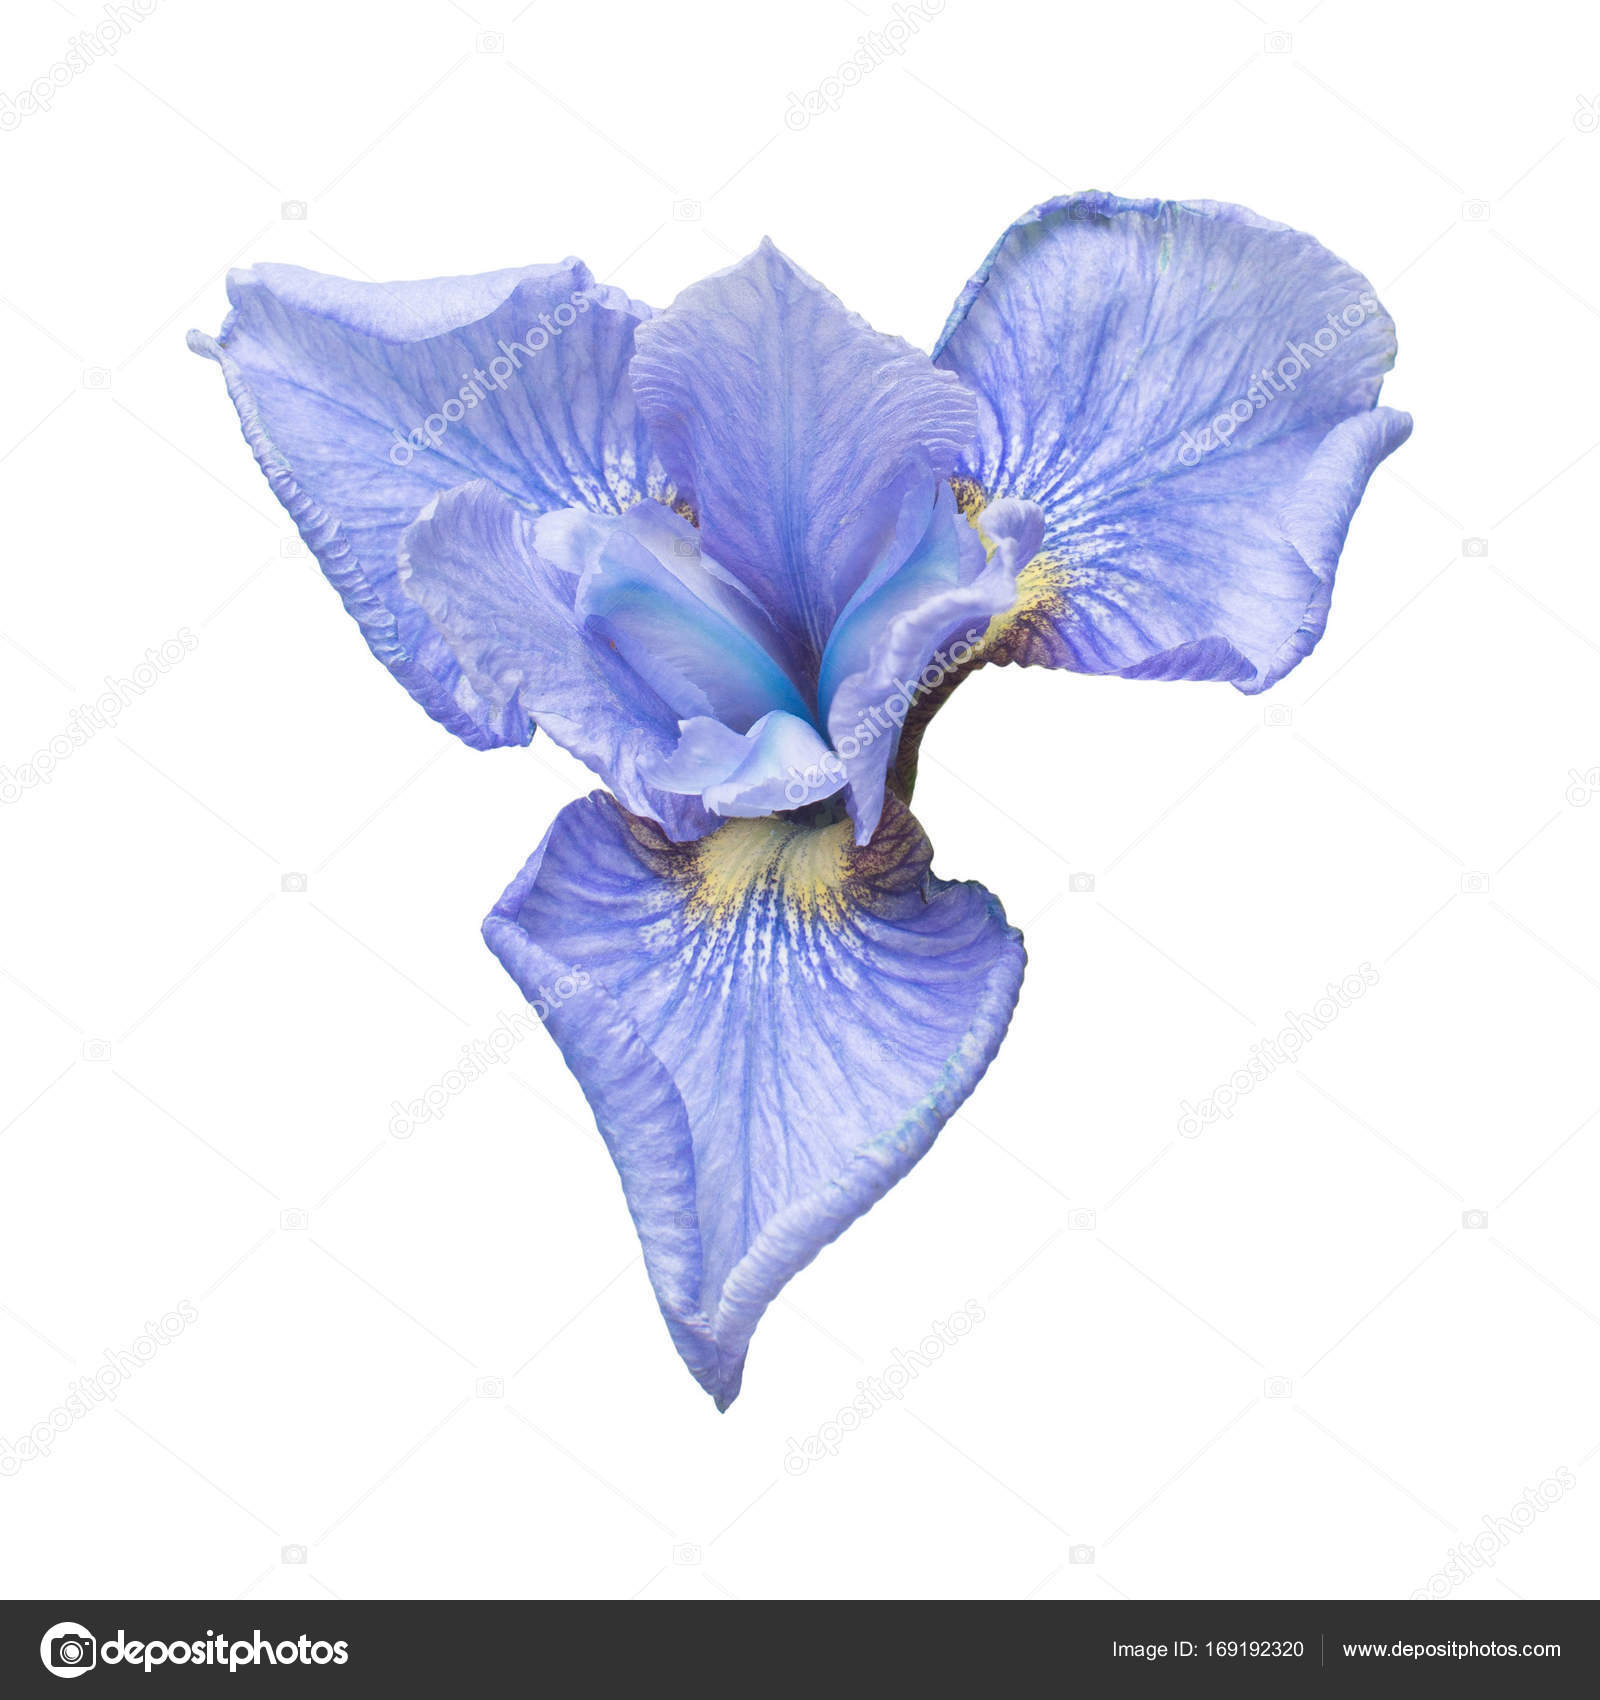 Beautiful blue iris flower with bud, branches and leaves isolate ...